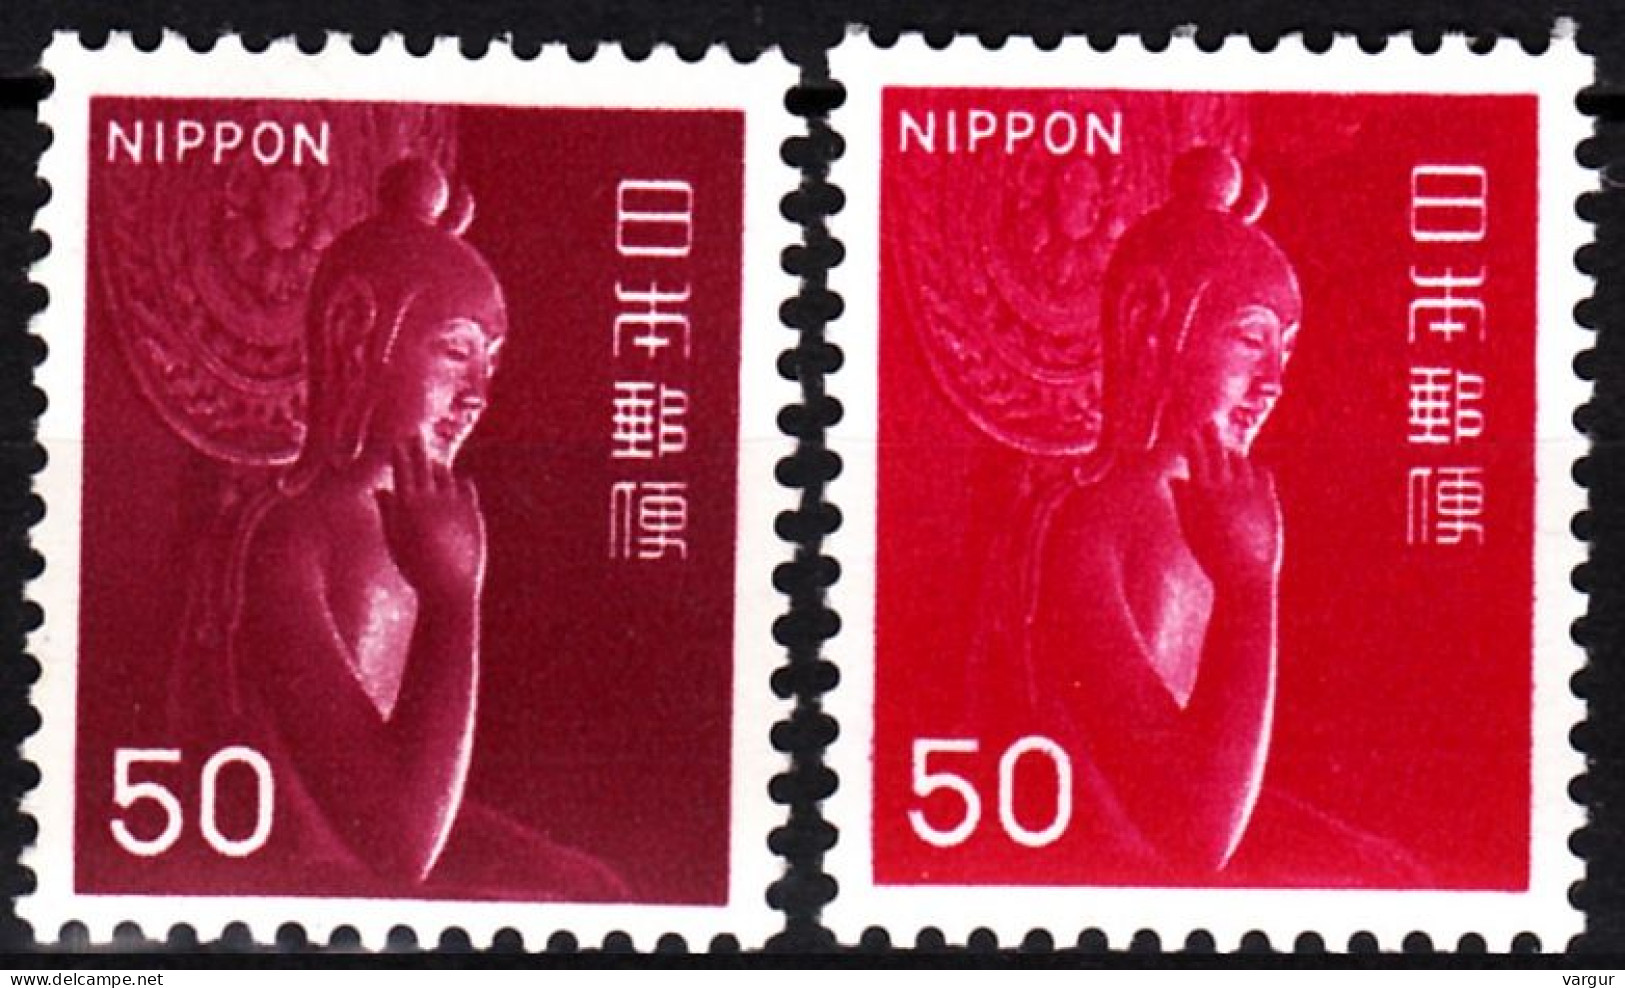 JAPAN 1966-67 Definitive With NIPPON: ART. Miroku Wooden Statue 50Y, 2 Types, MNH - Scultura